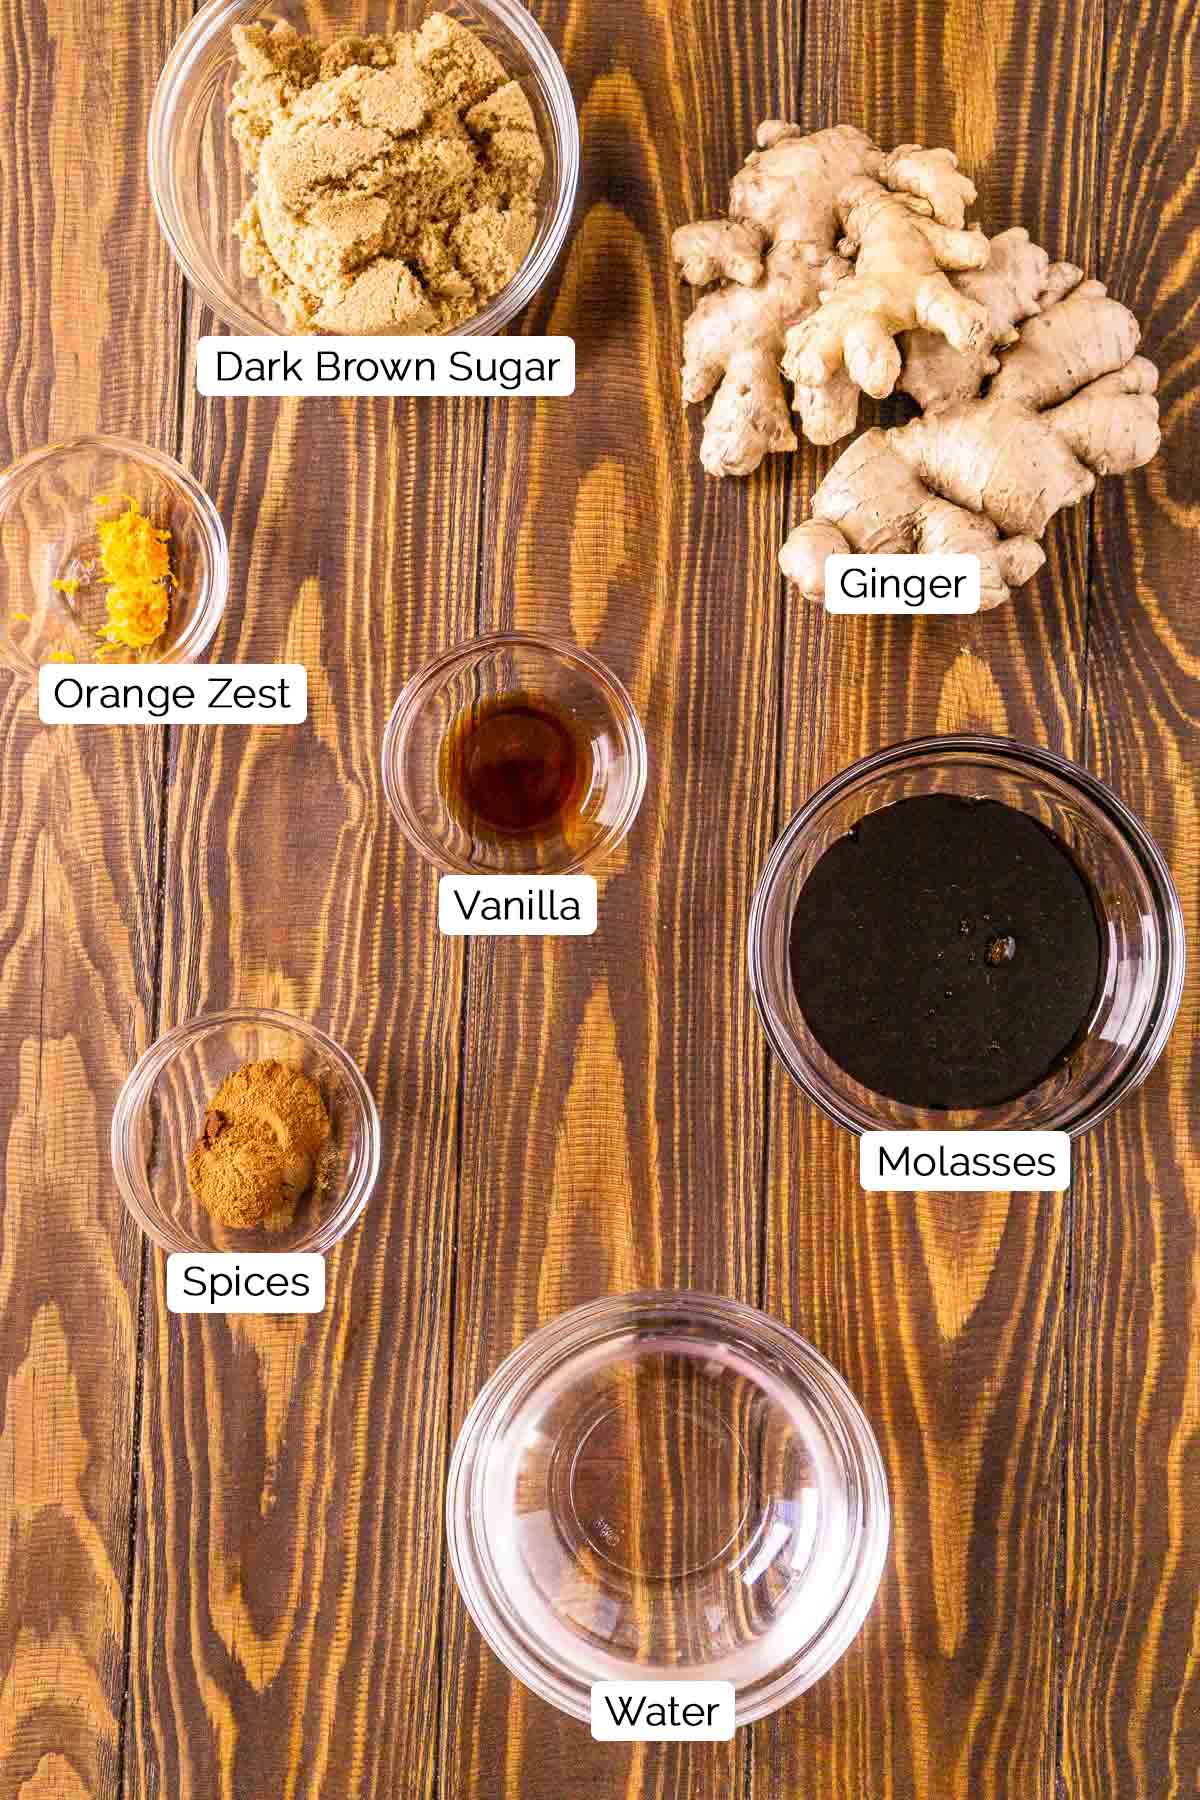 The ingredients on a brown wooden surface with black and white labels underneath each item.